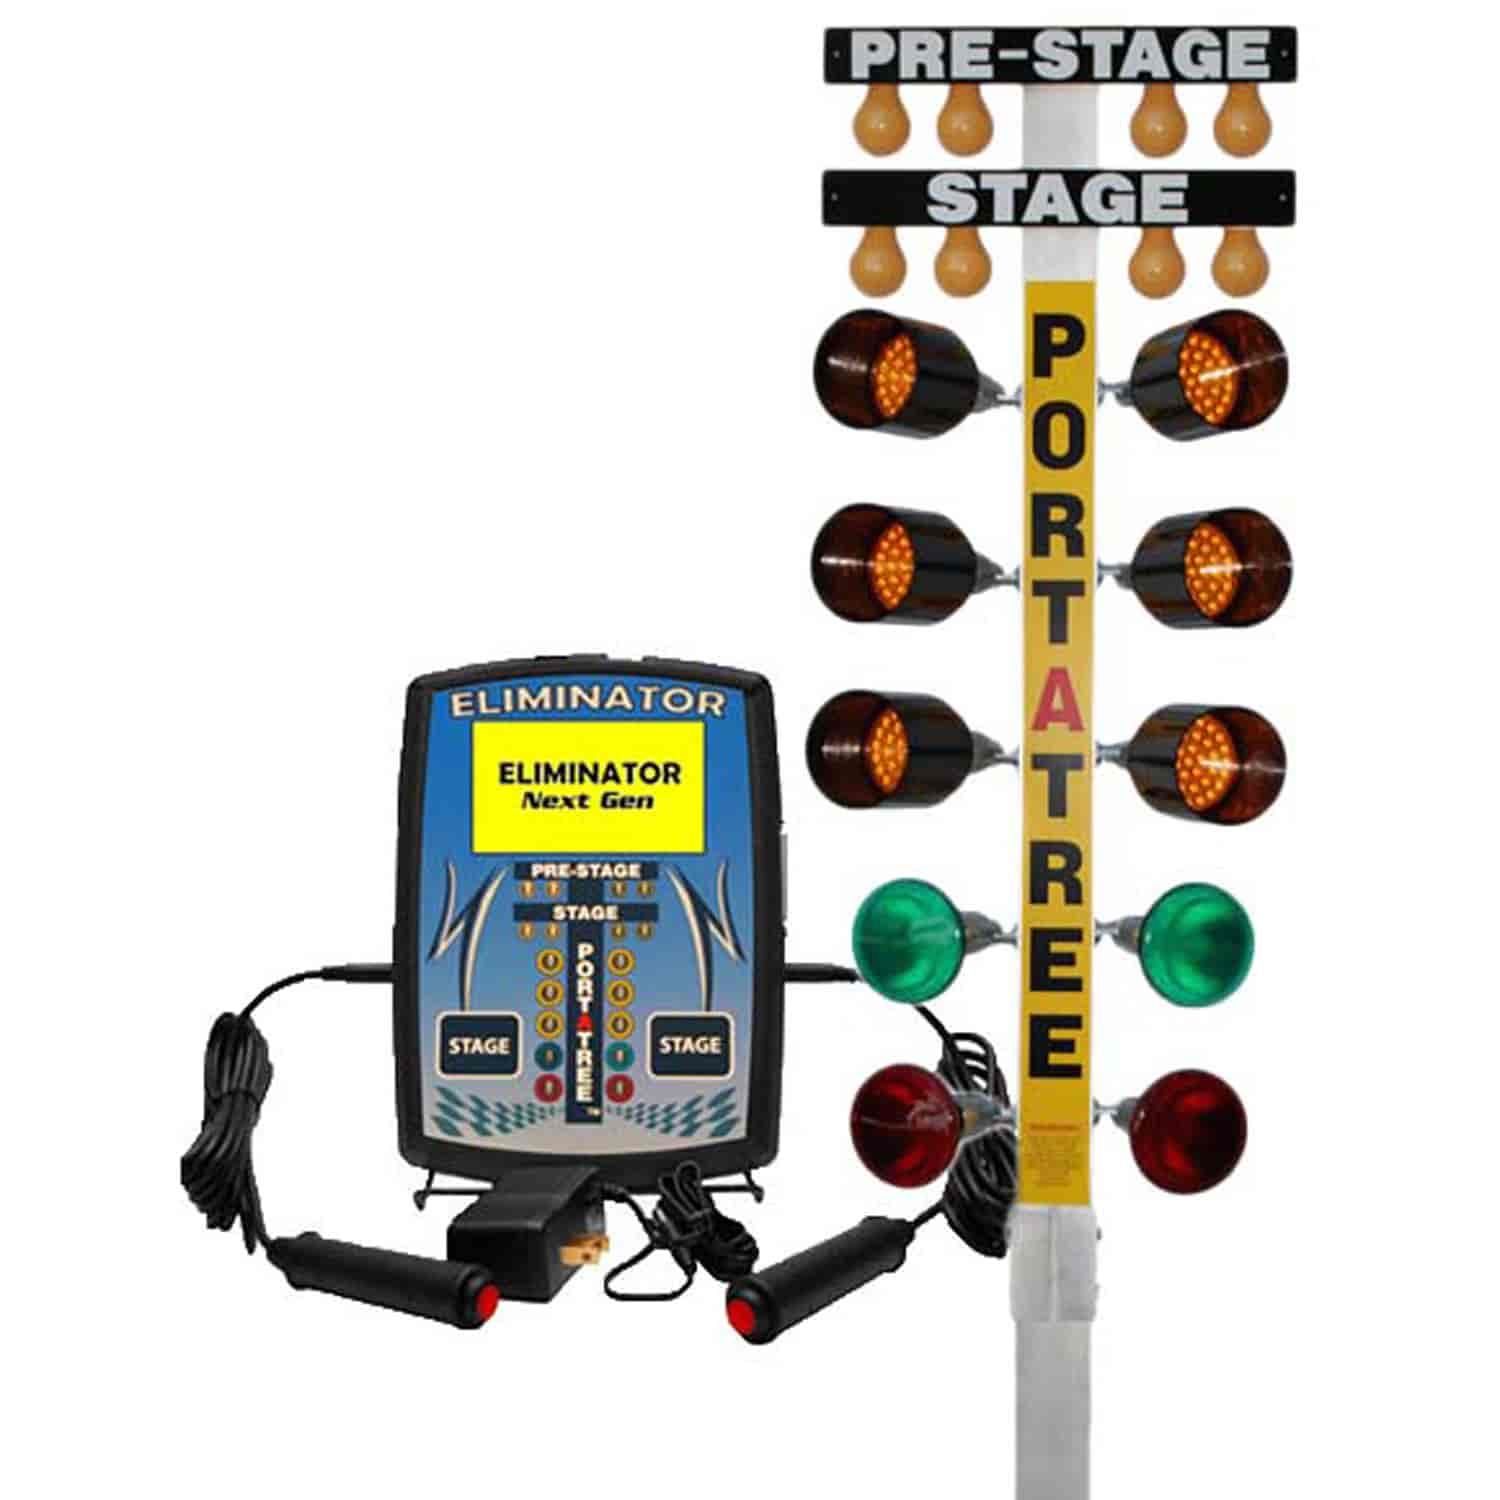 Eliminator Next Gen and National Event Tree with LED Bulbs Kit